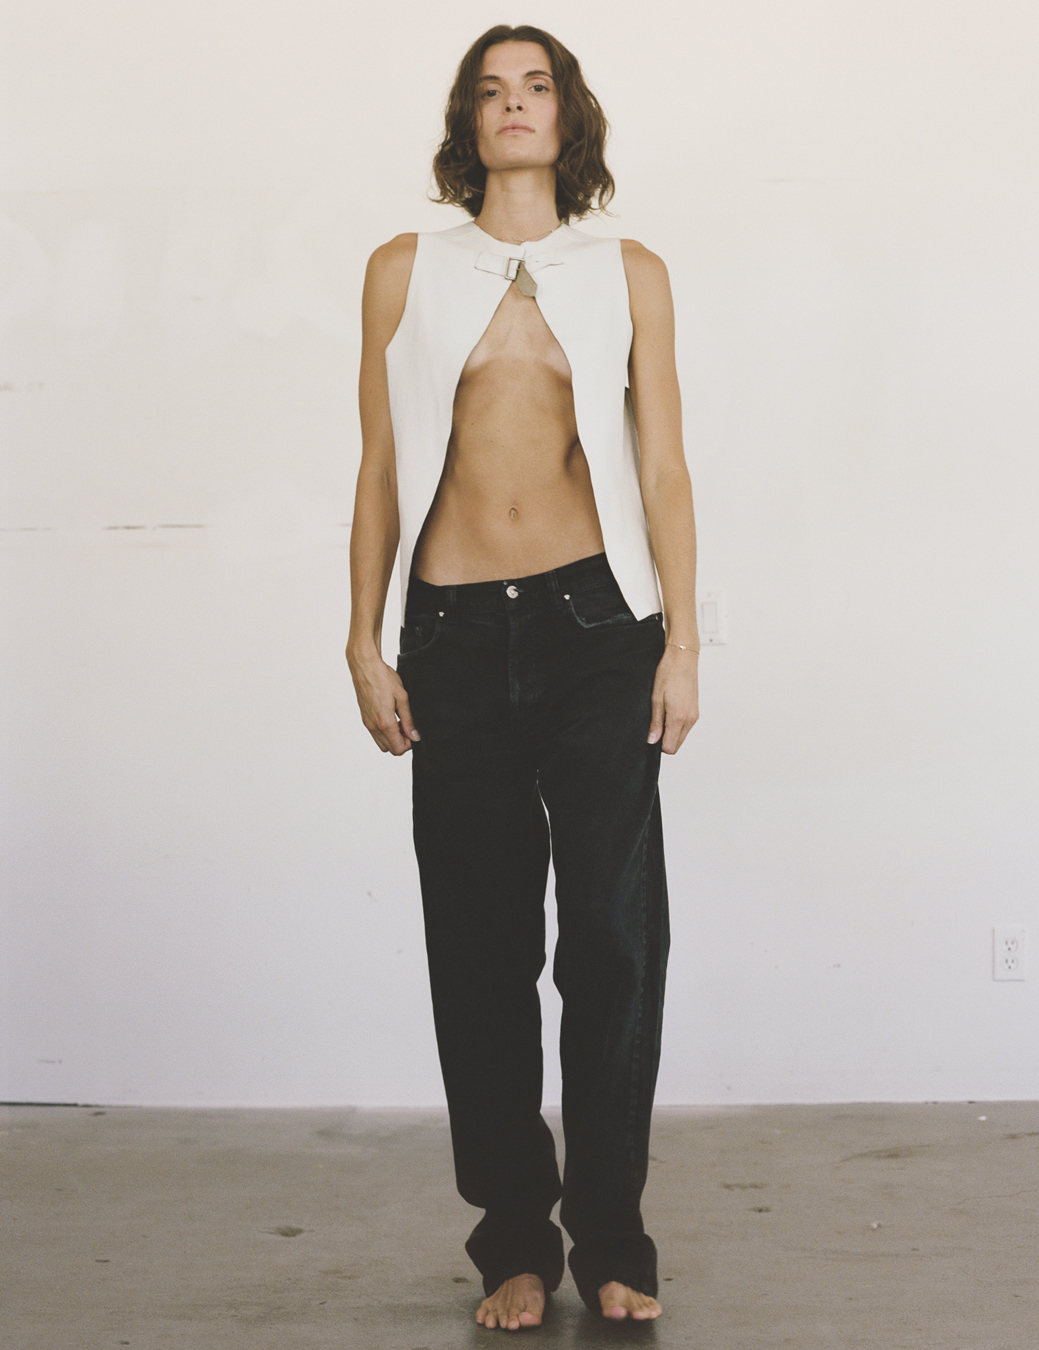 a model wears black jeans with a white open waistcoat top, her toned stomach showing